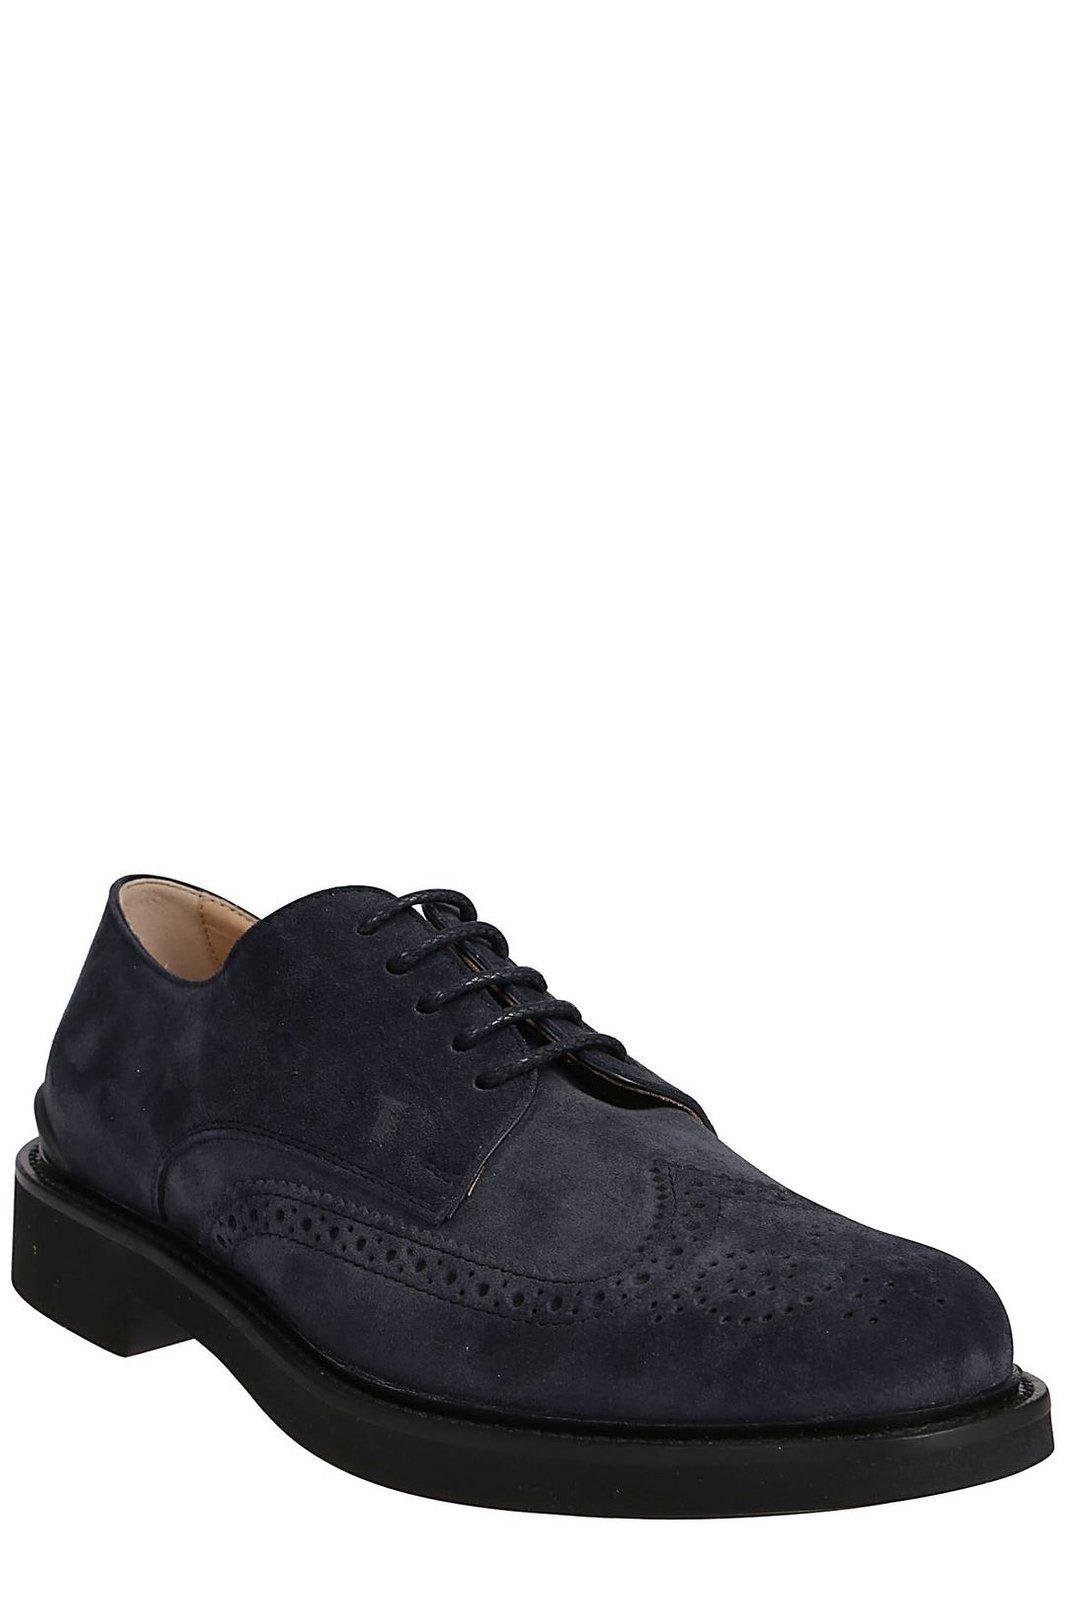 Tod's Lace-up Brogue Shoes